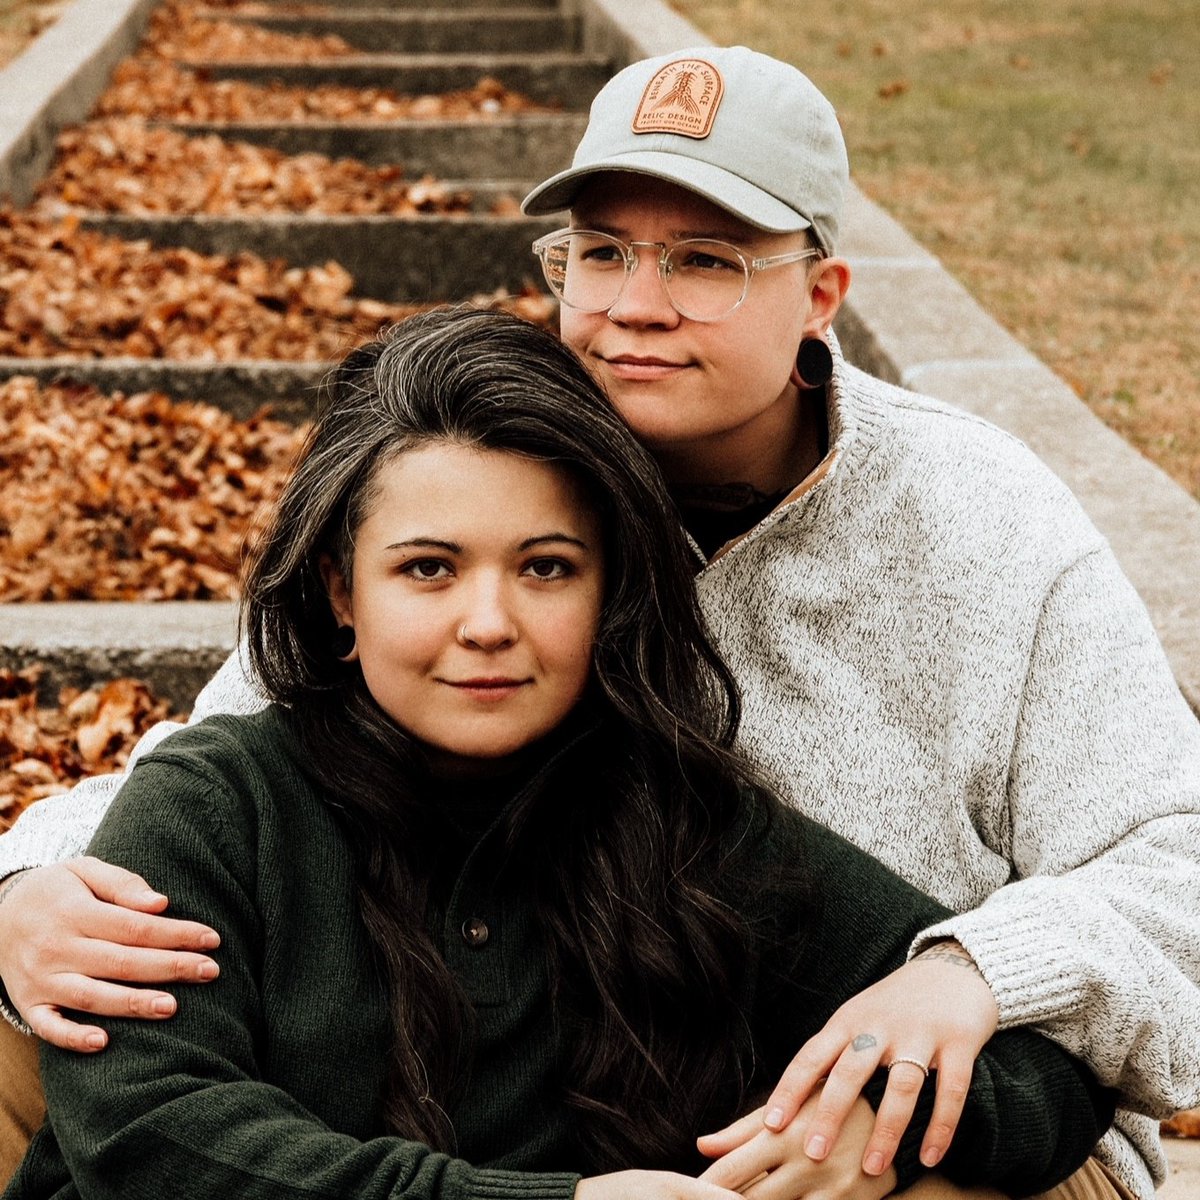 'She reads and learns about MS on her own time. She comes to my appointments with me and helps me advocate for myself. She comforts me when I’m feeling unsure or afraid of the future. I don’t know how I would do any of this without her.' ~Holly, #ThisIsMS #CouplesWithMS